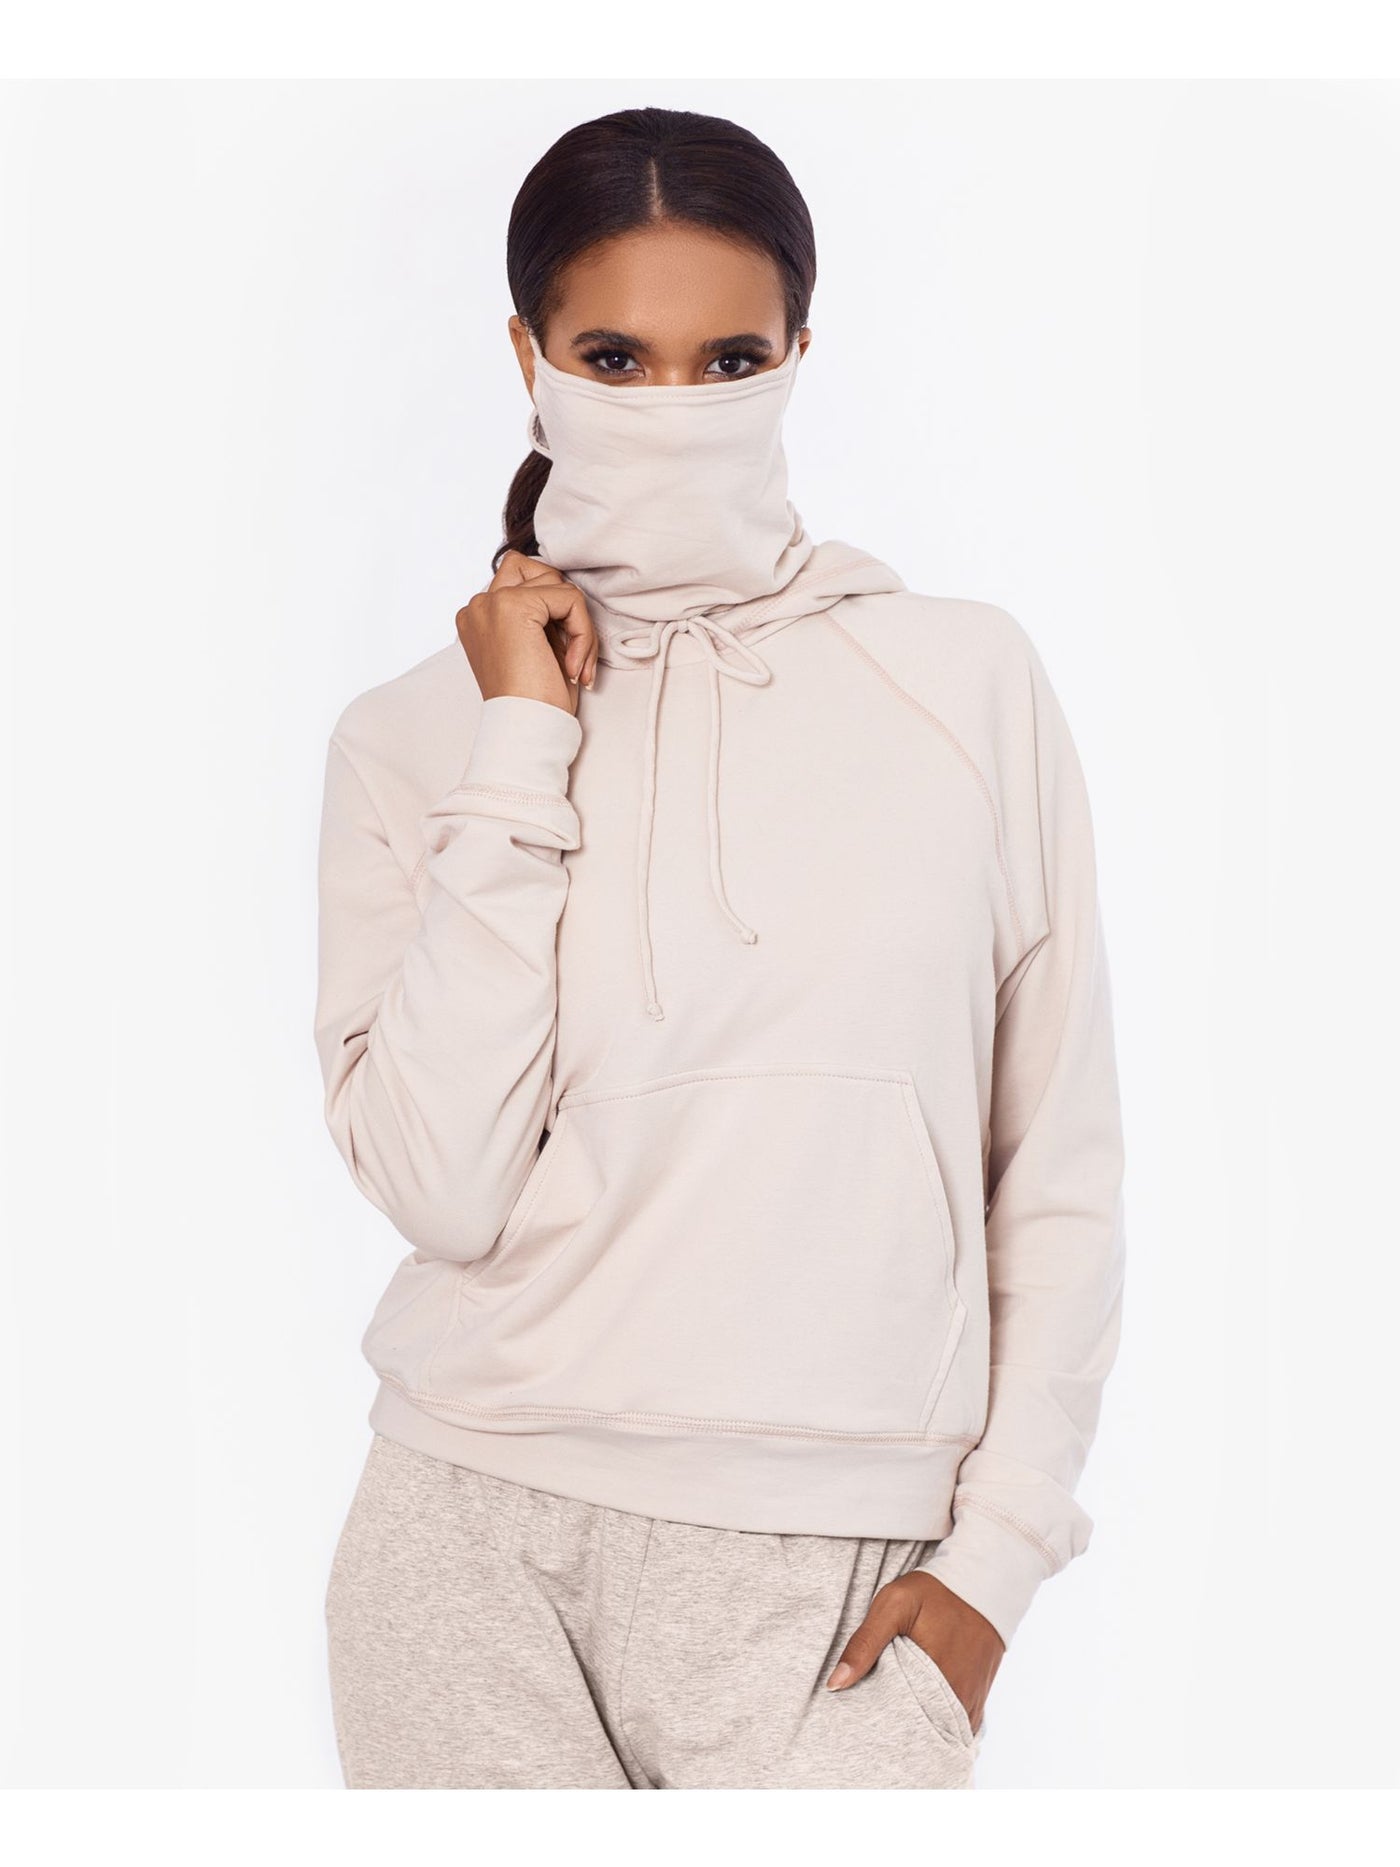 BAM BY BETSY & ADAM Womens Beige Stretch Tie Built-in Mask, Relaxed Fit Long Sleeve Hoodie Top XS